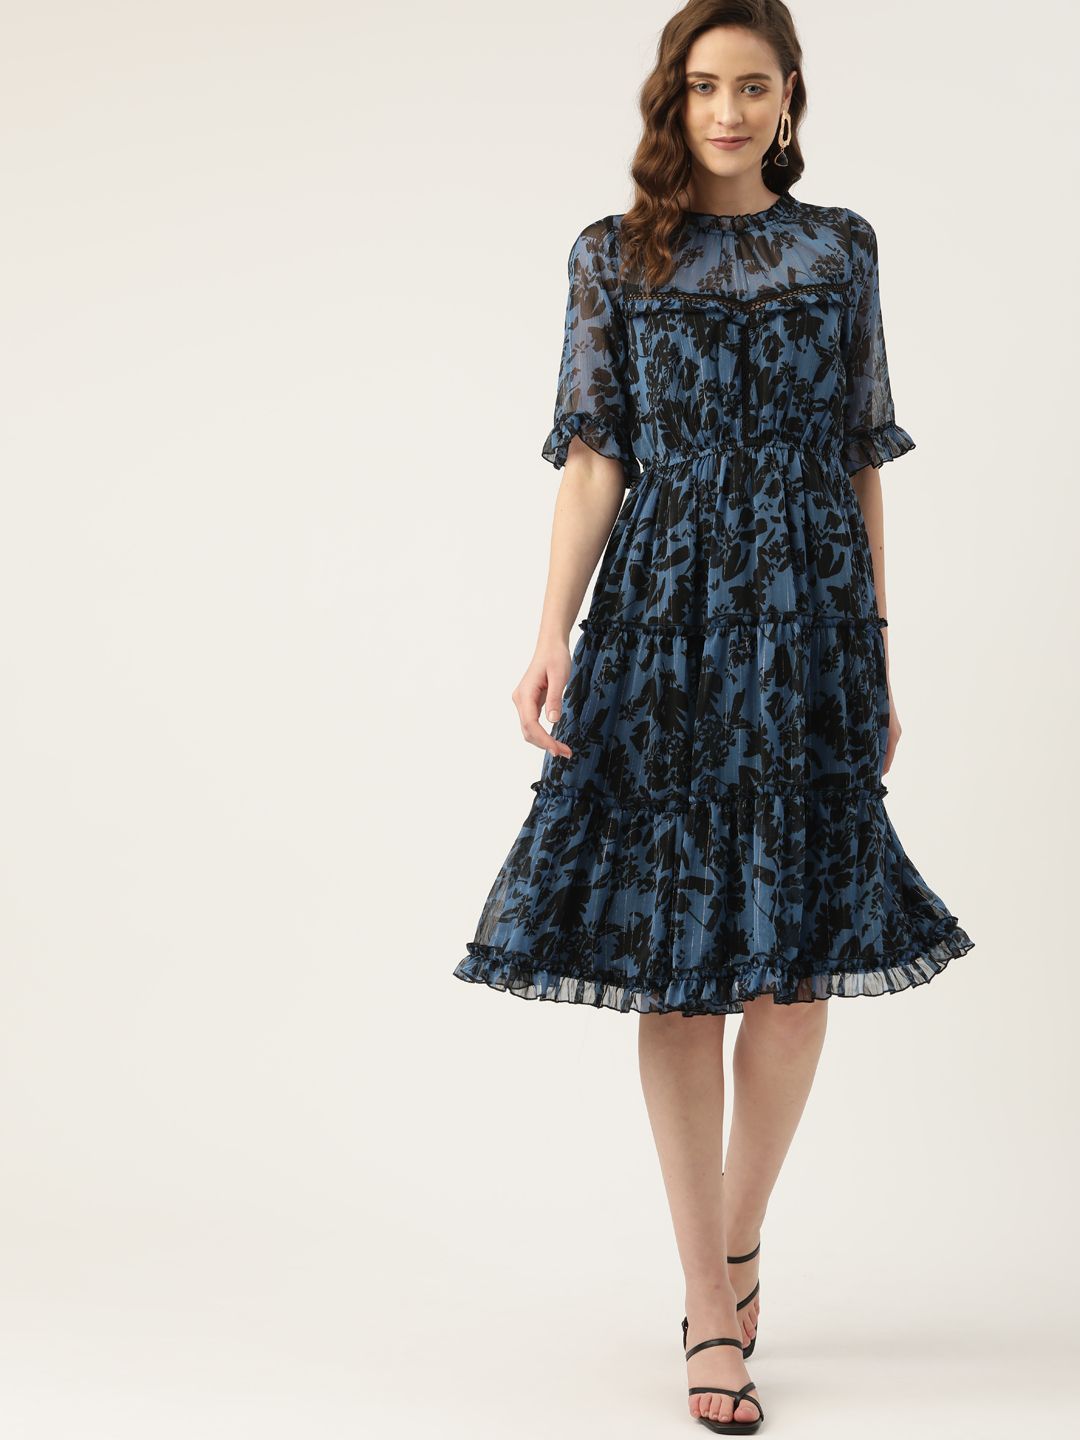 Antheaa Blue & Black Floral Print Chiffon Tiered Dress Price in India